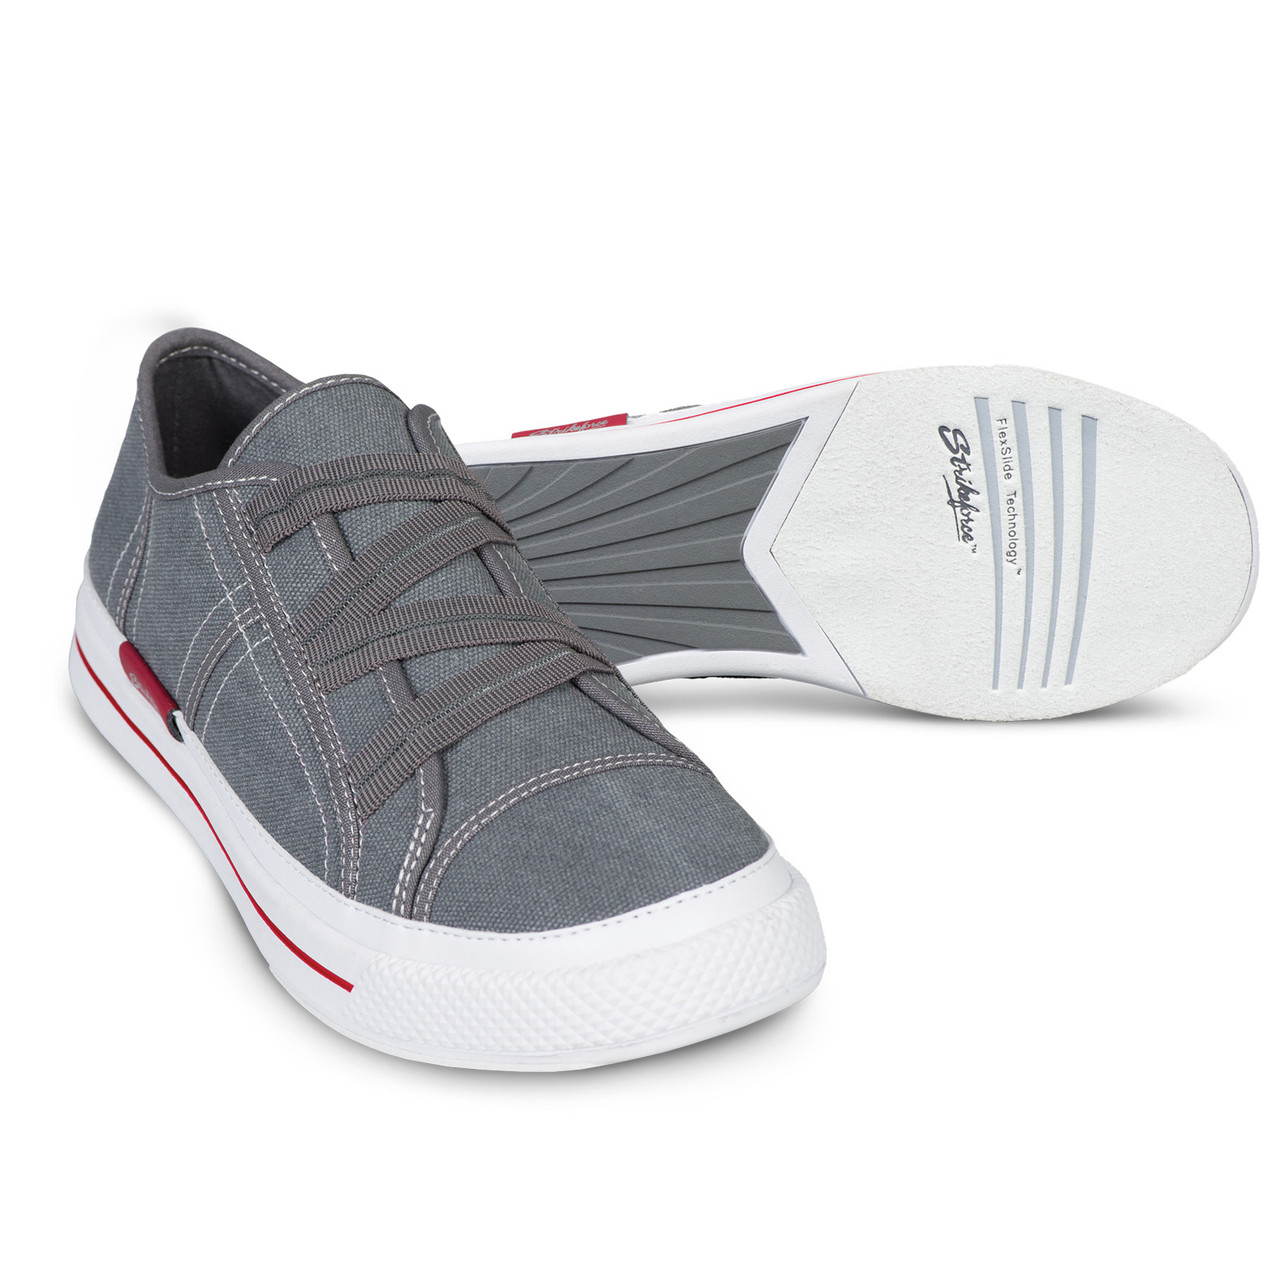 slip on bowling shoes